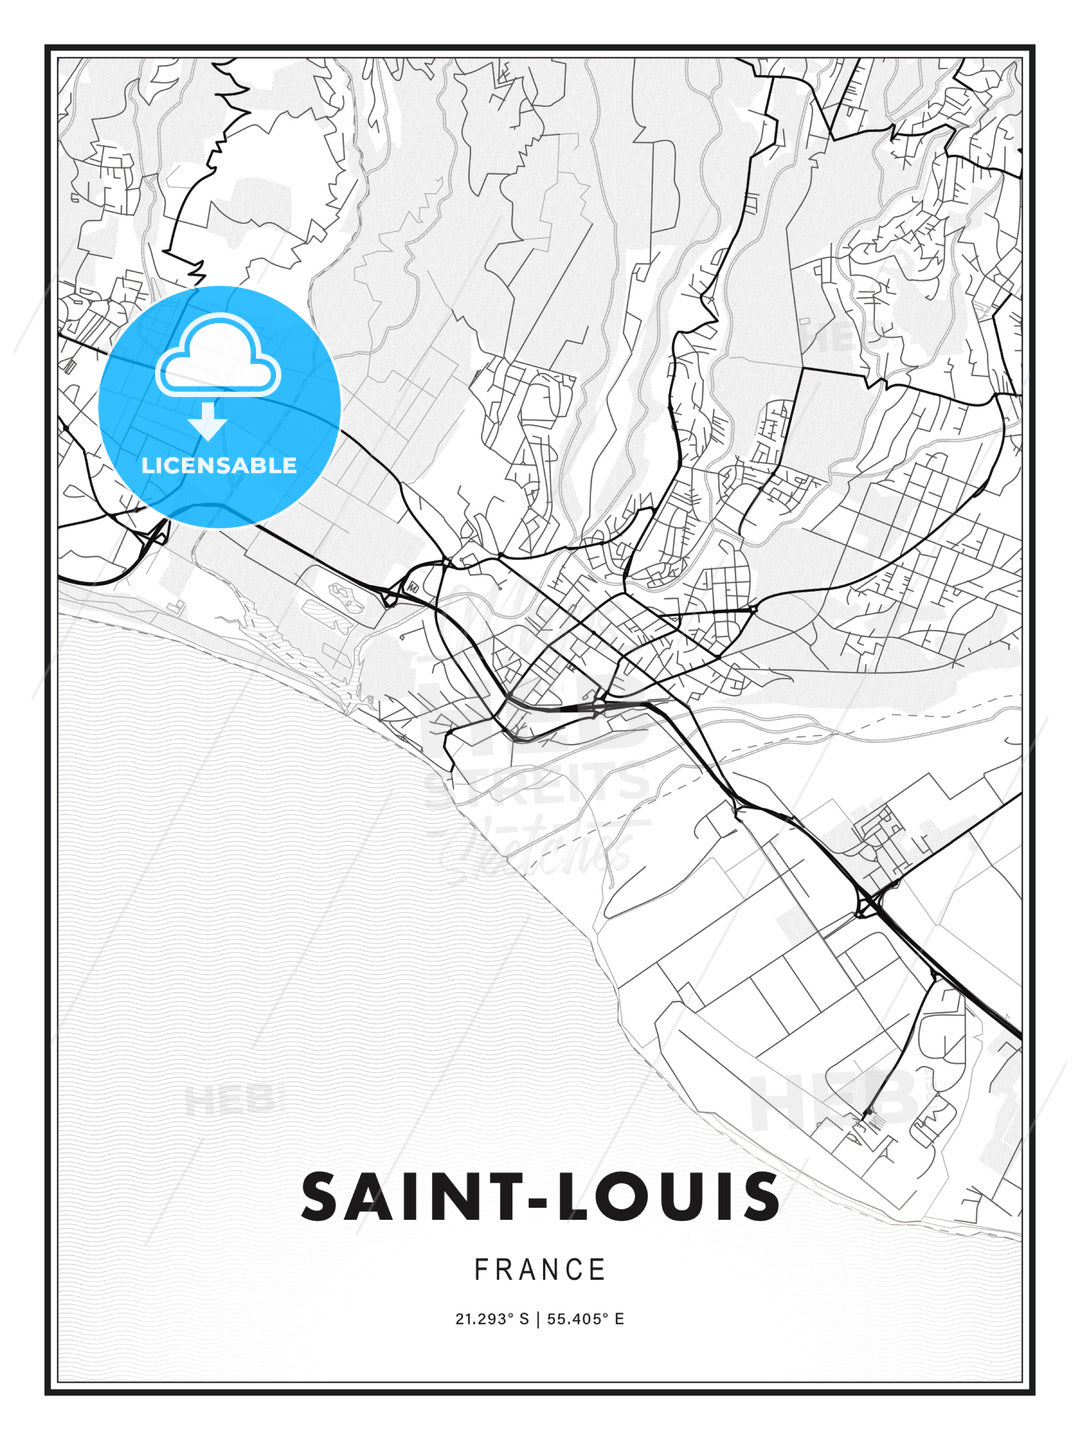 Saint-Louis, France, Modern Print Template in Various Formats - HEBSTREITS Sketches